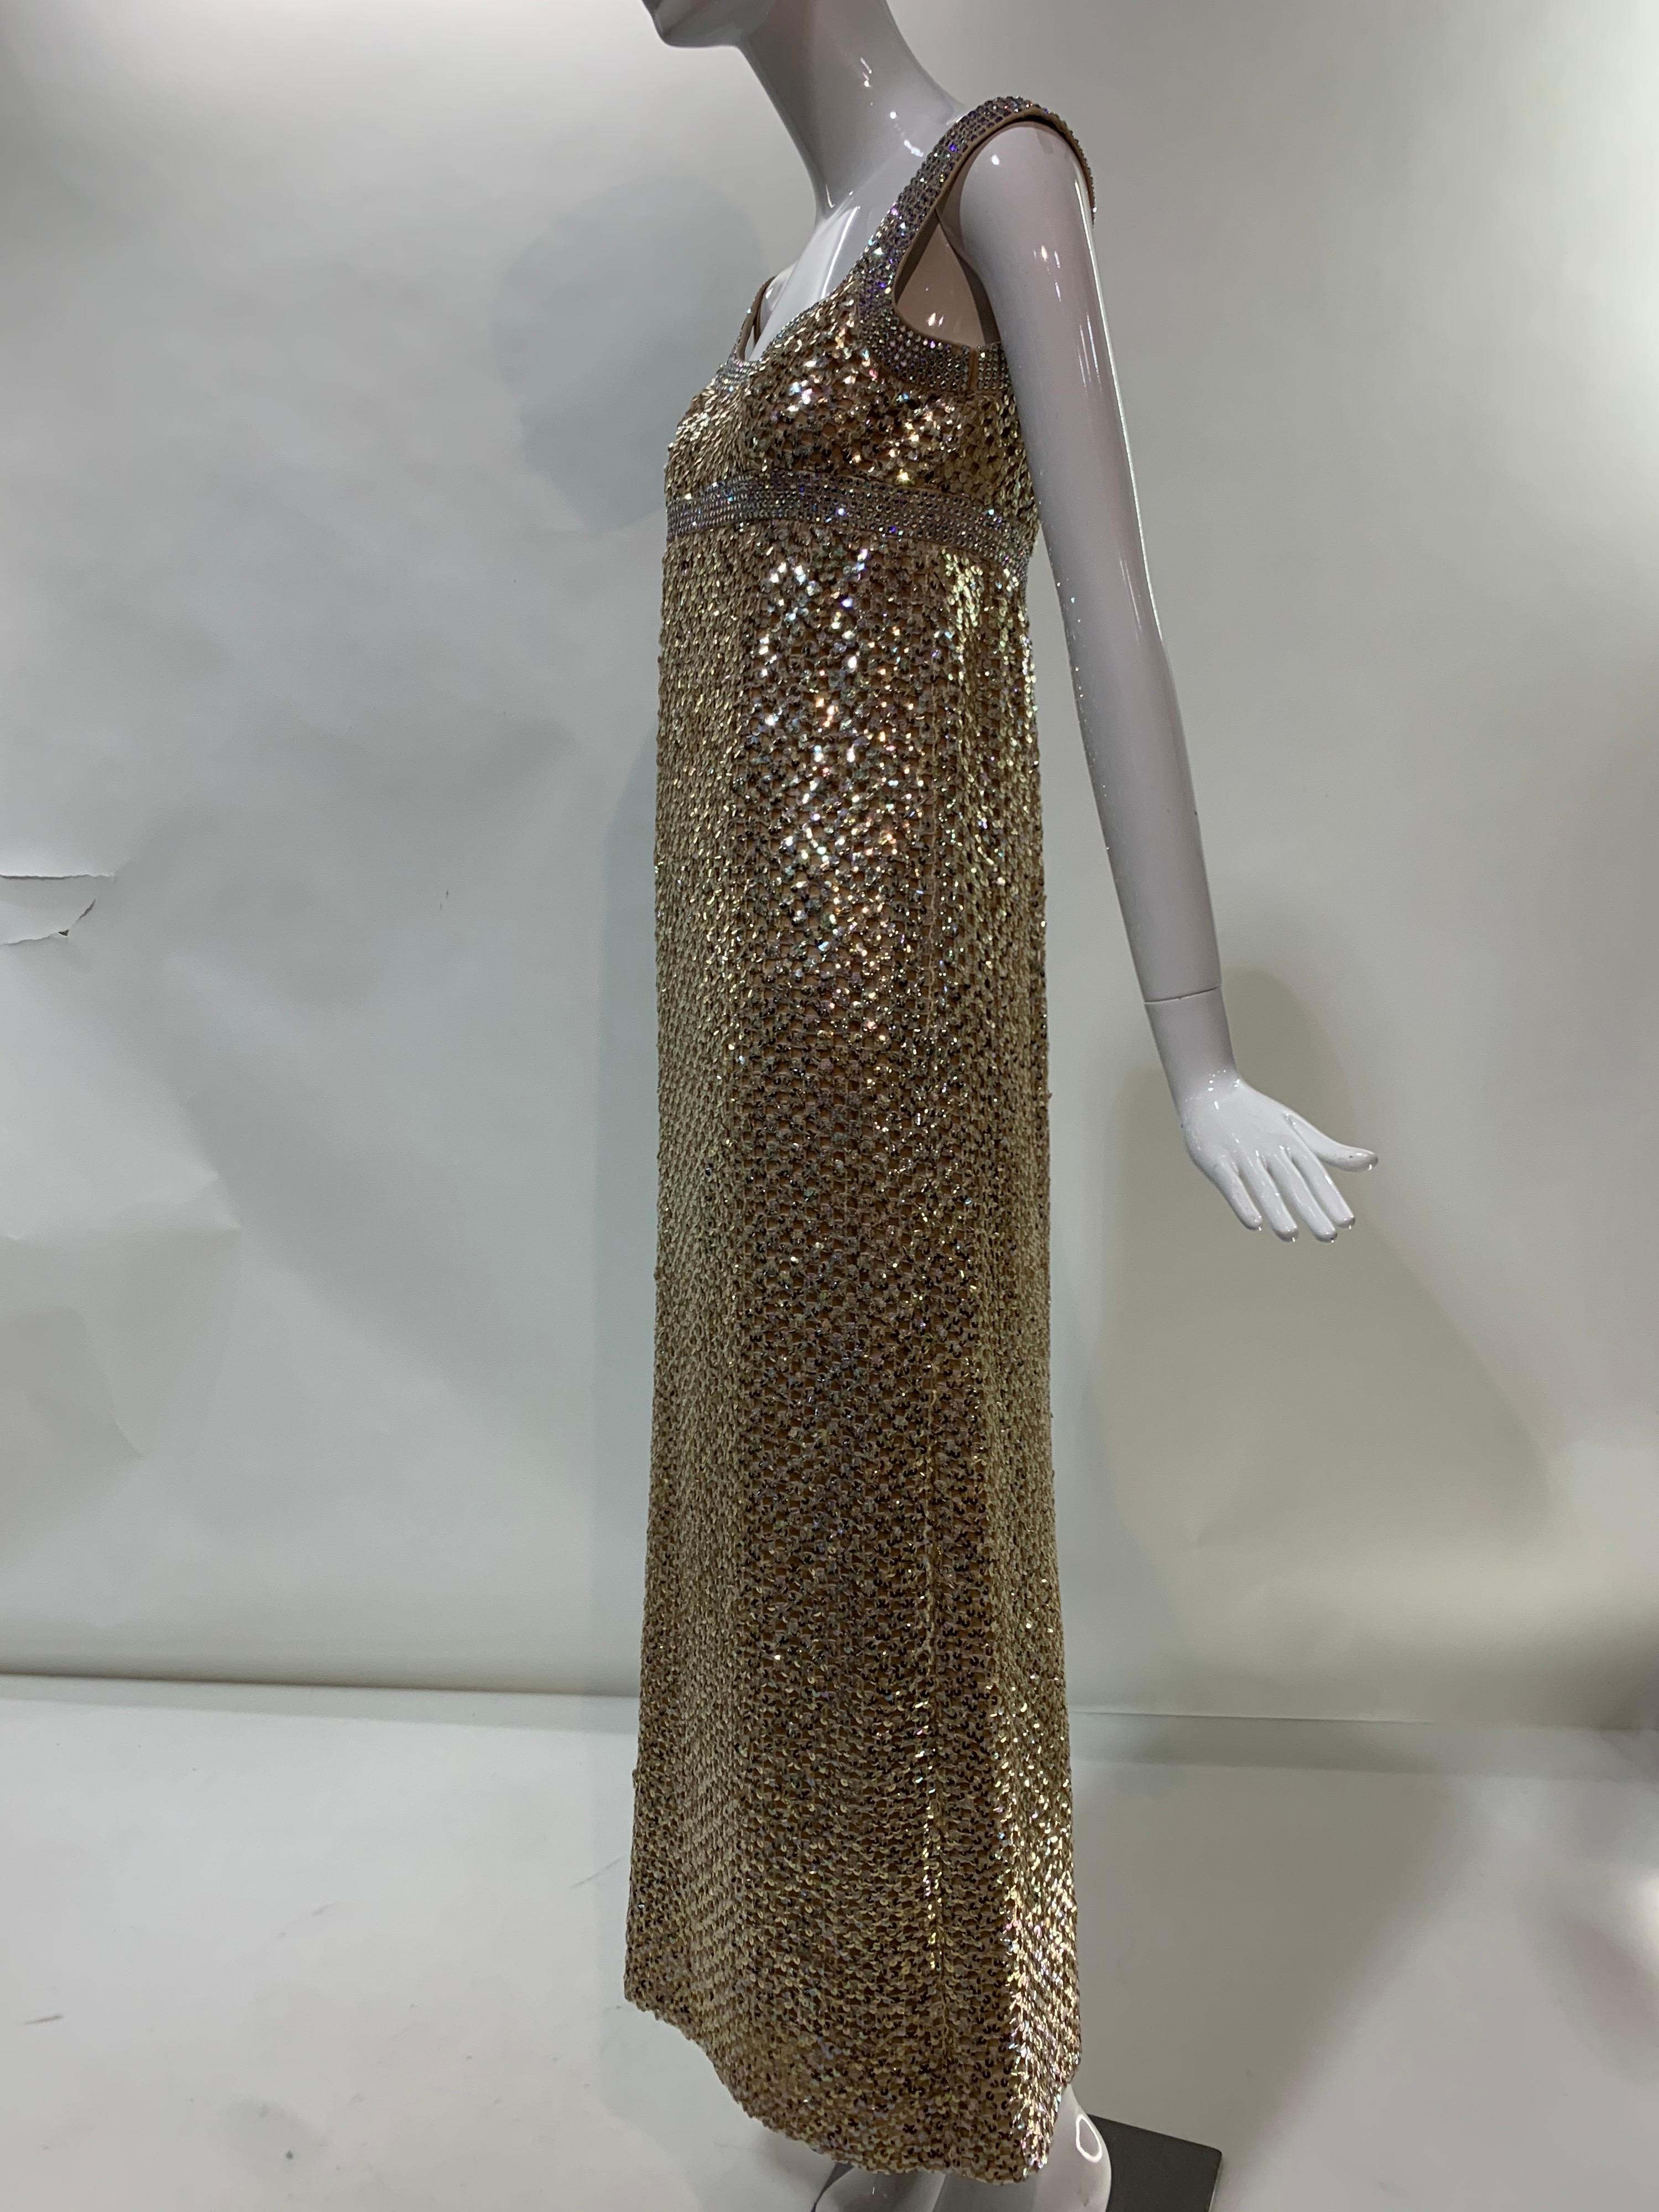 1960s Mod Empire Waist Gown in Gold Sequin Lattice and Iridescent Rhinestones For Sale 7